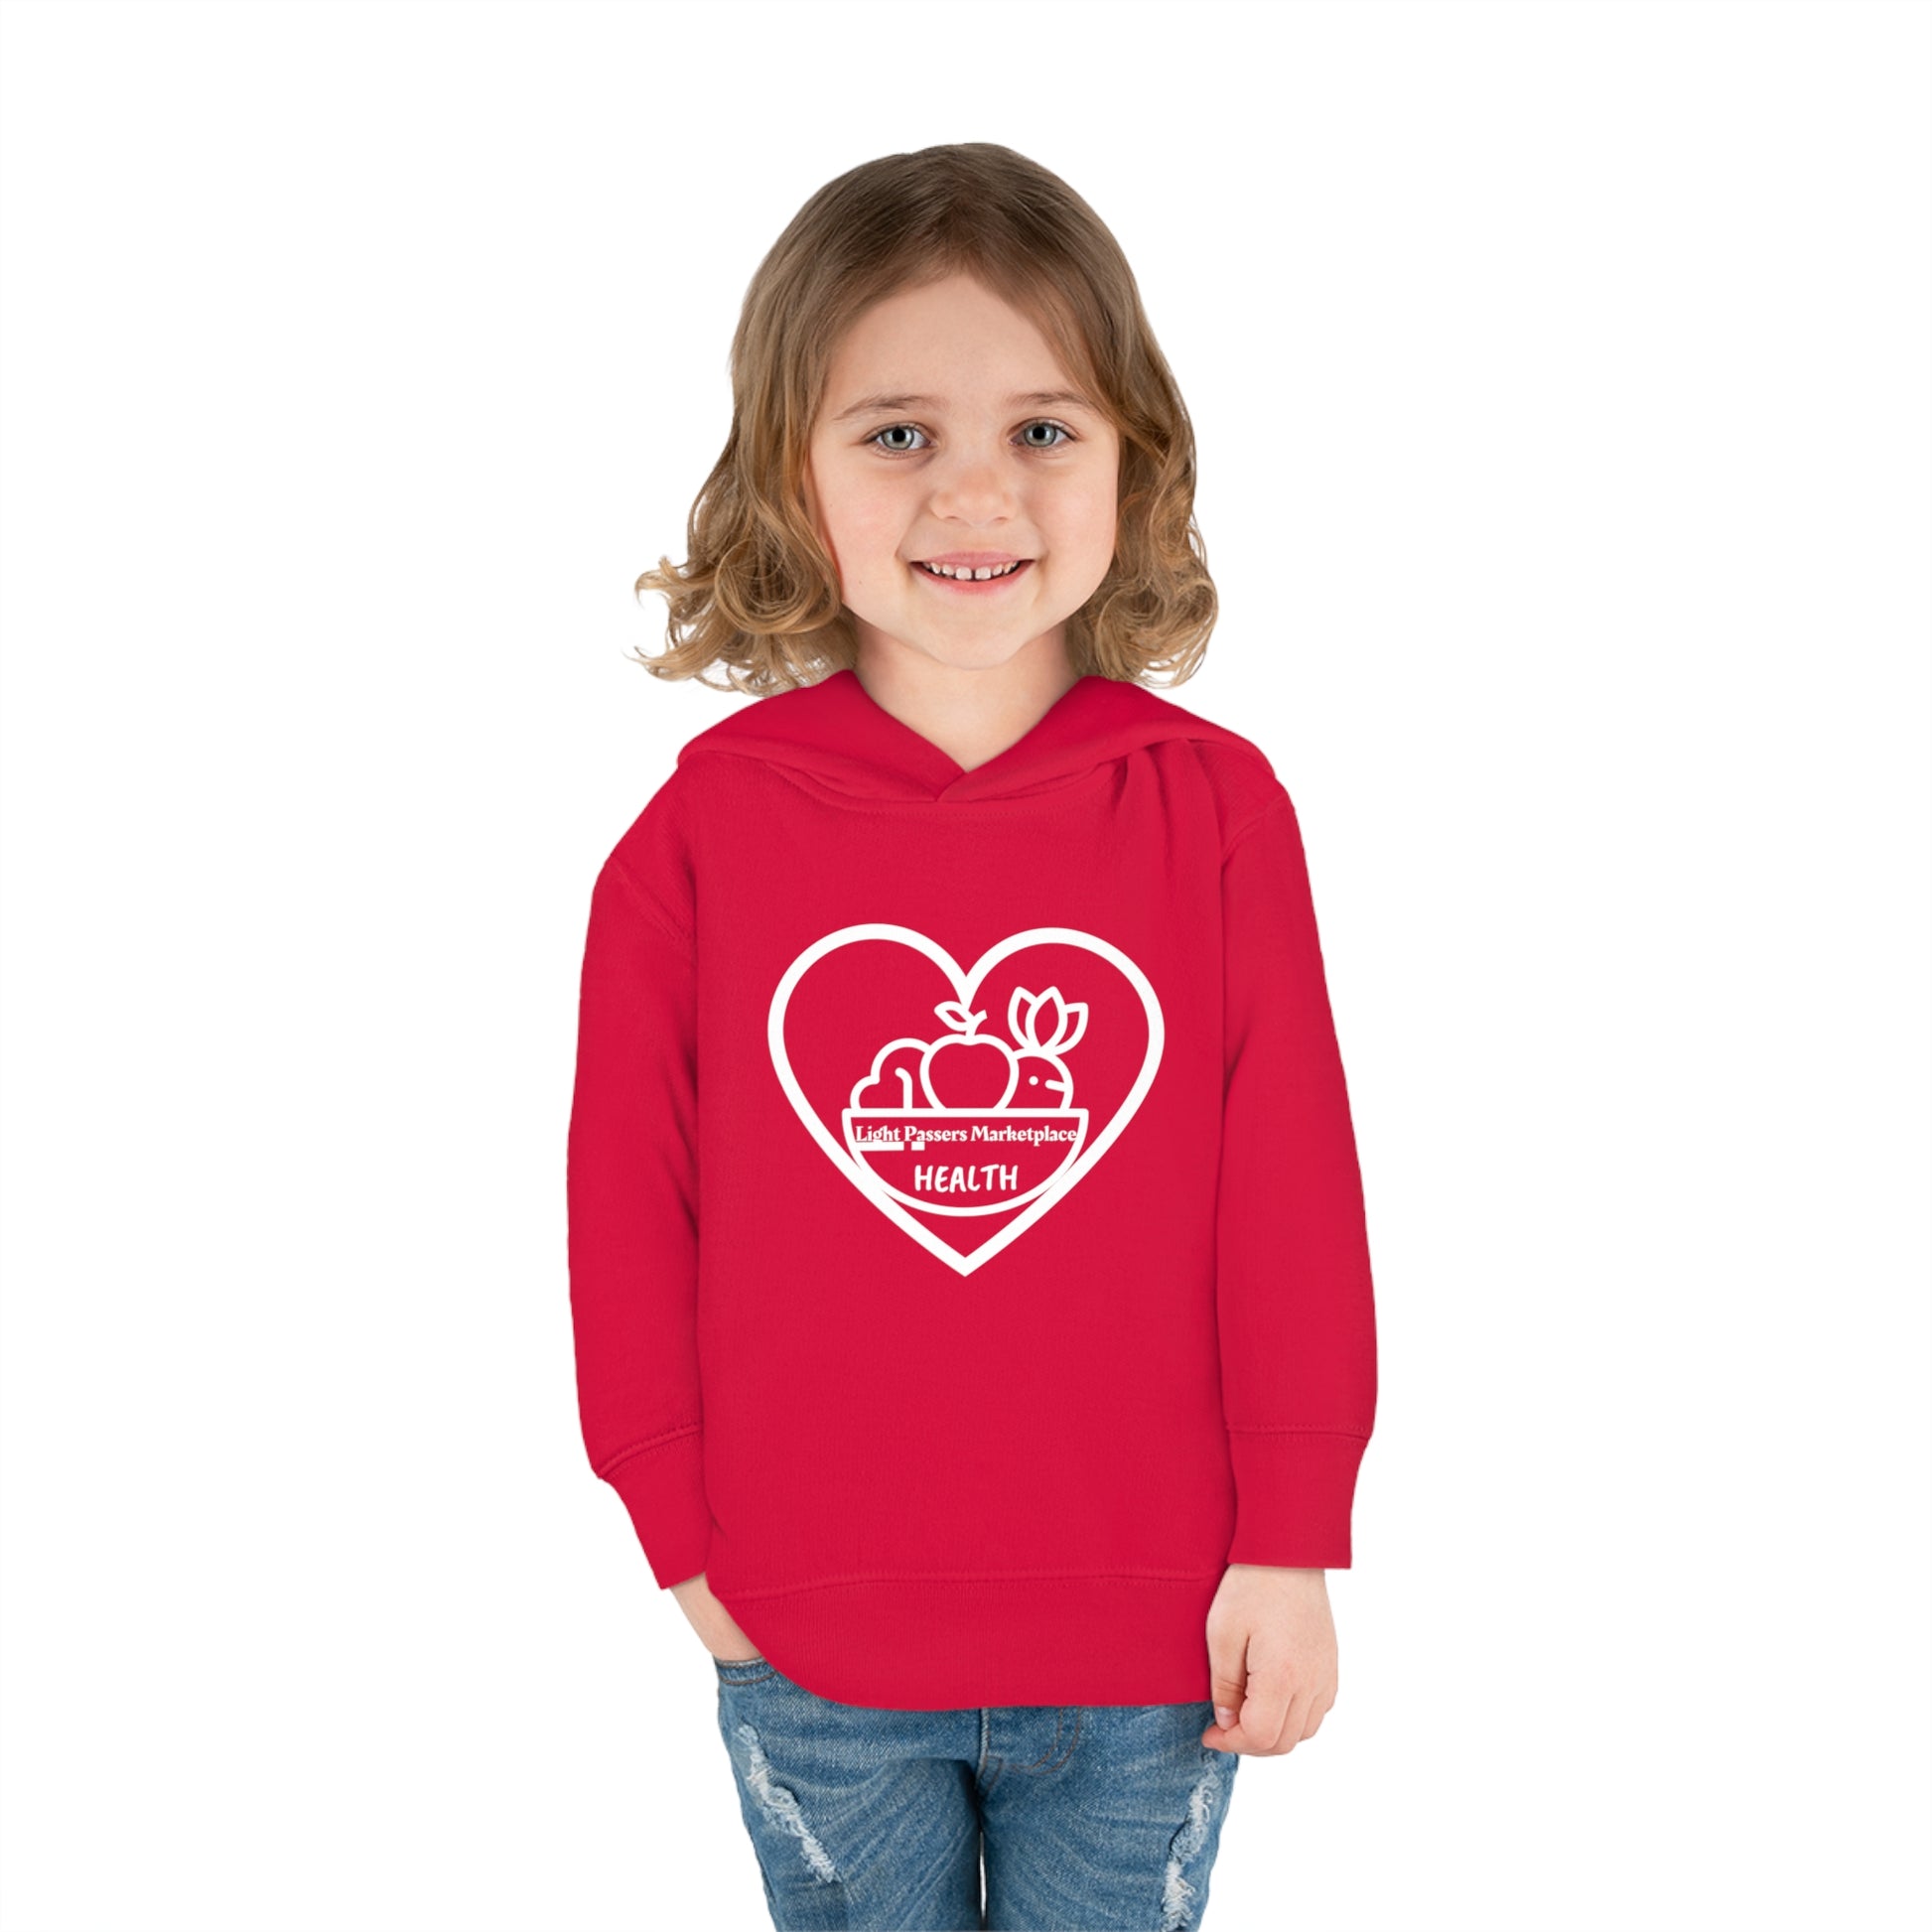 A smiling toddler in a red Rabbit Skins hoodie with side pockets, cover-stitched details, and a jersey-lined hood for comfort and durability.